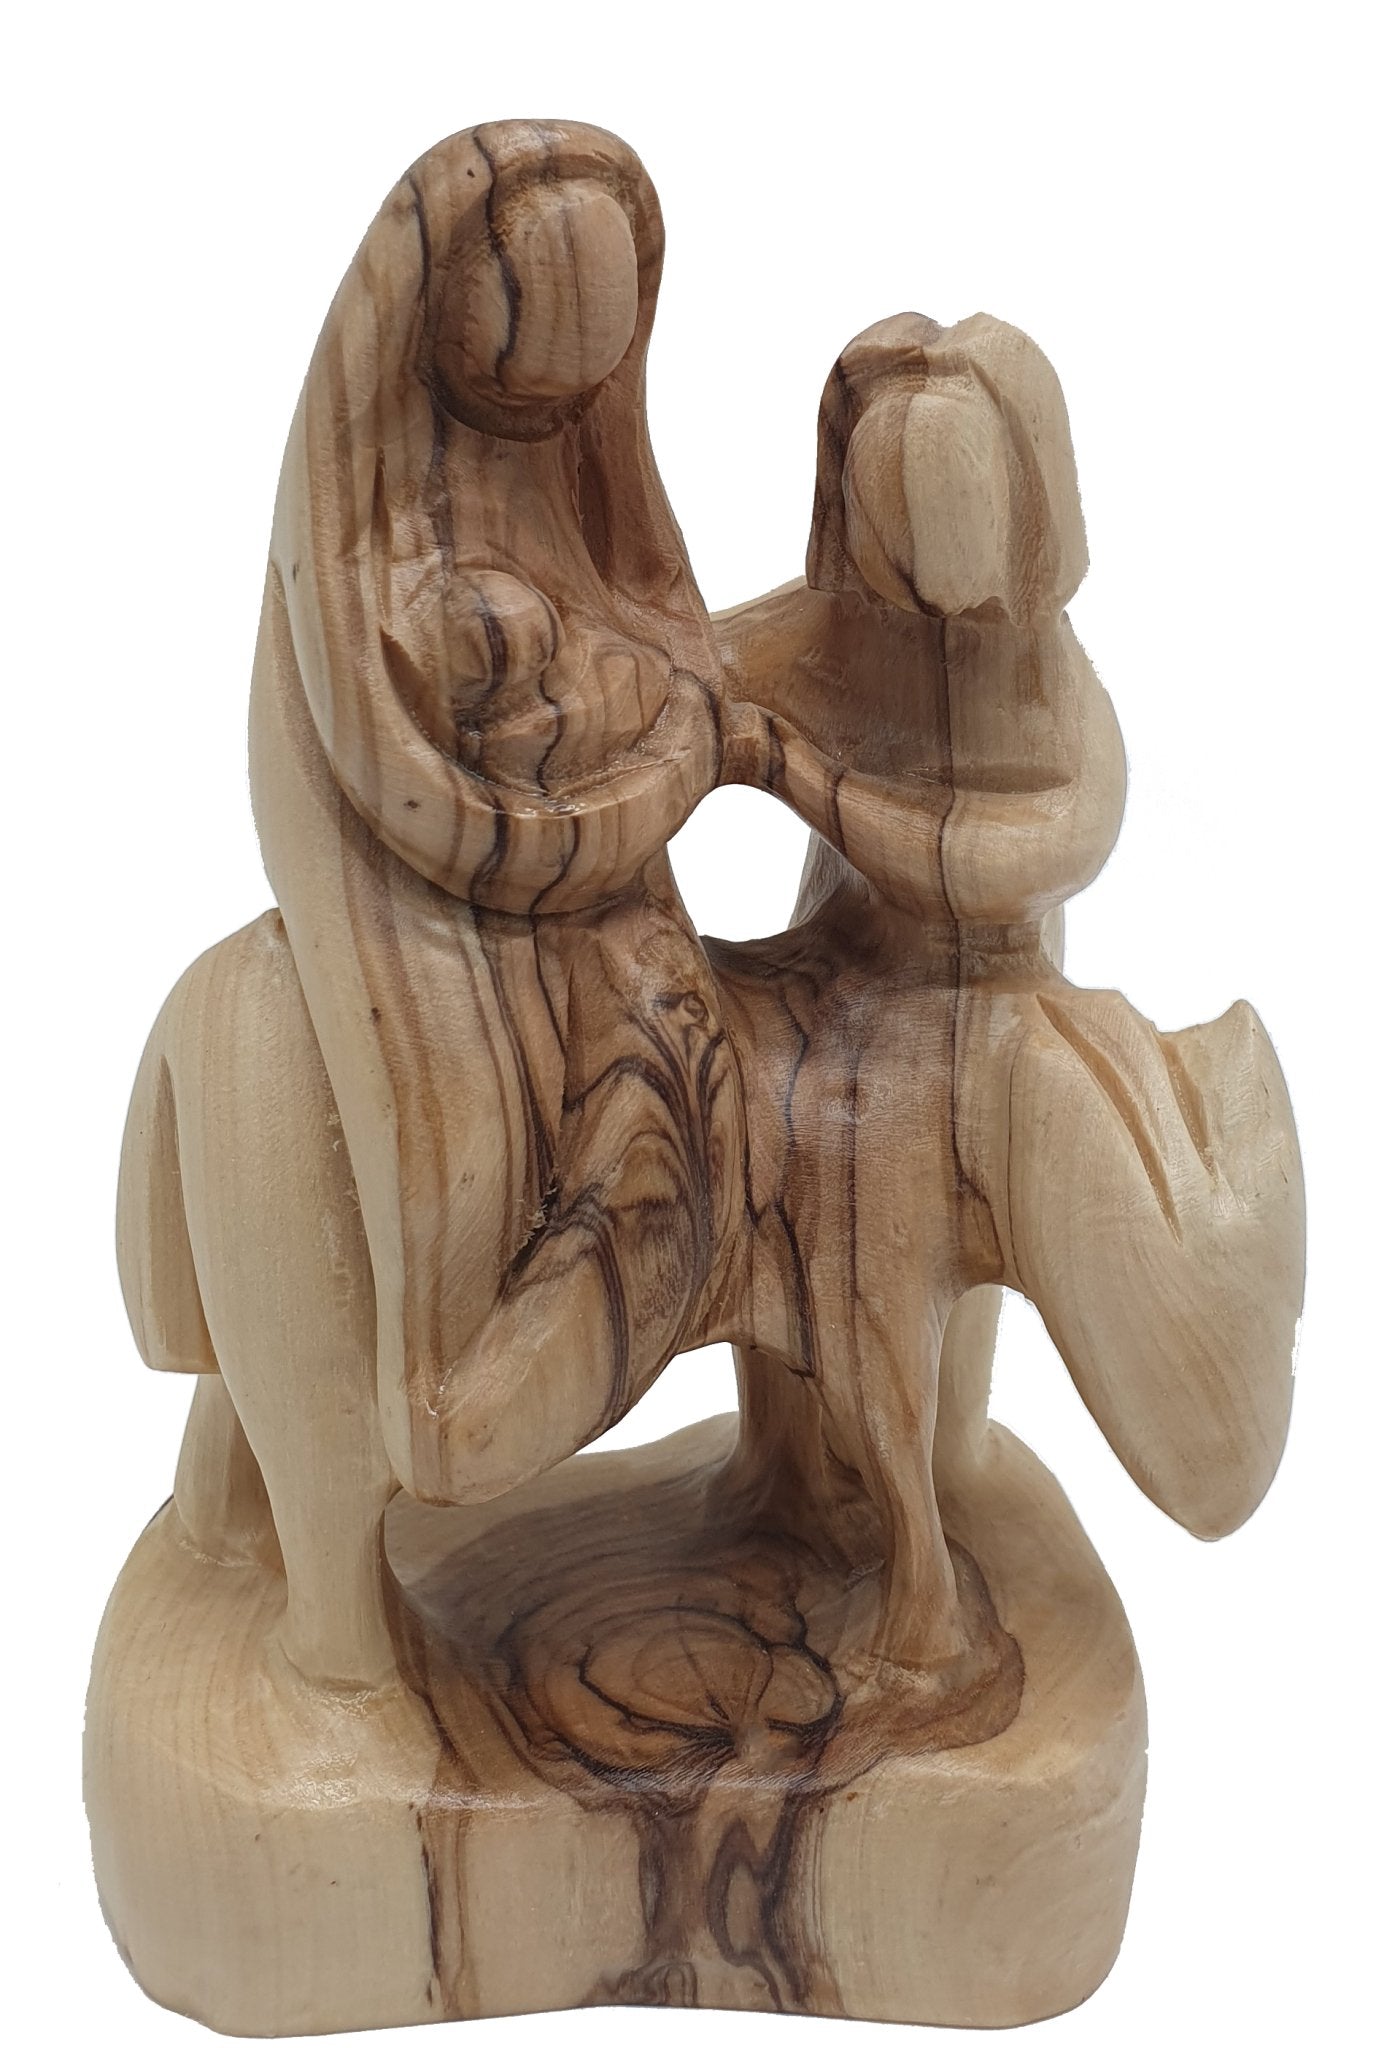 Olive Wood Nativity Statue - Flight to Egypt Scene, Jesus, Mary, and Joseph - Holy Land Crafted - Zuluf